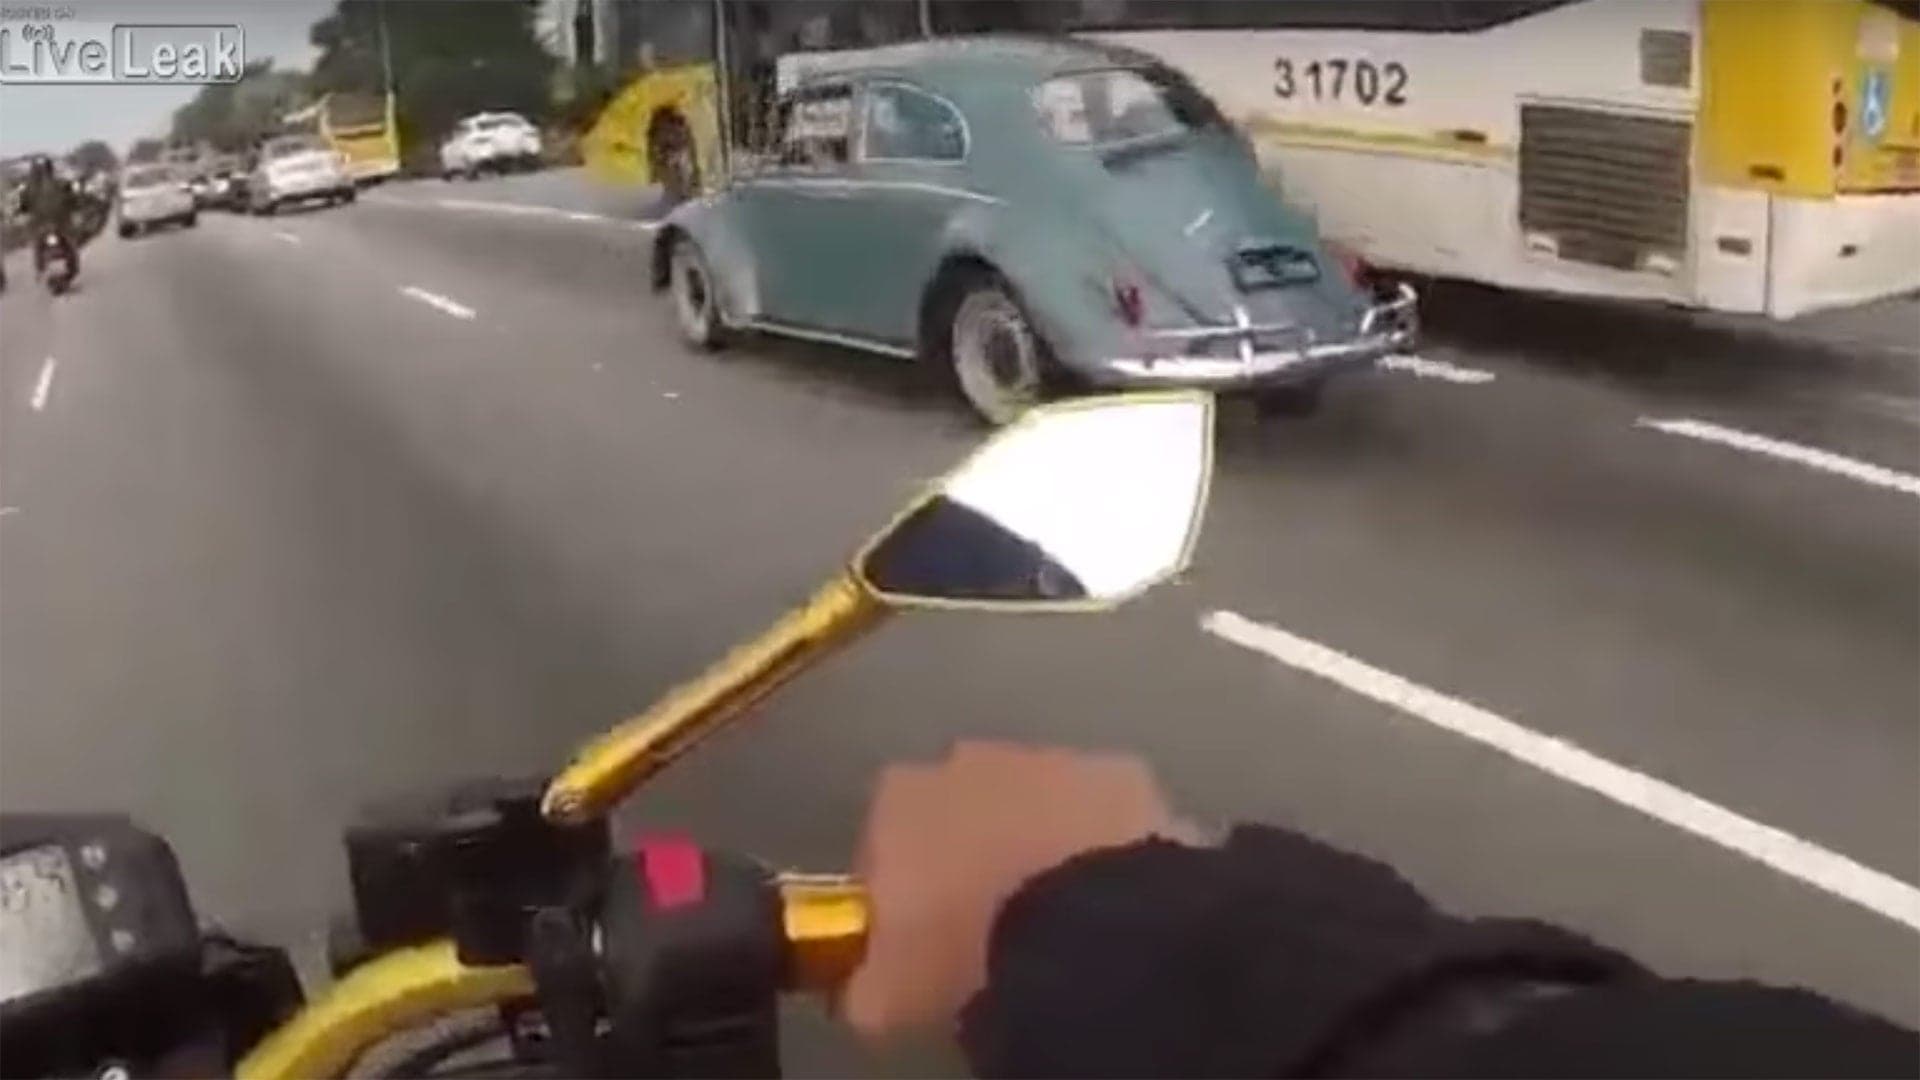 Motorcyclist Plows Into Car After Staring at Volkswagen Beetle